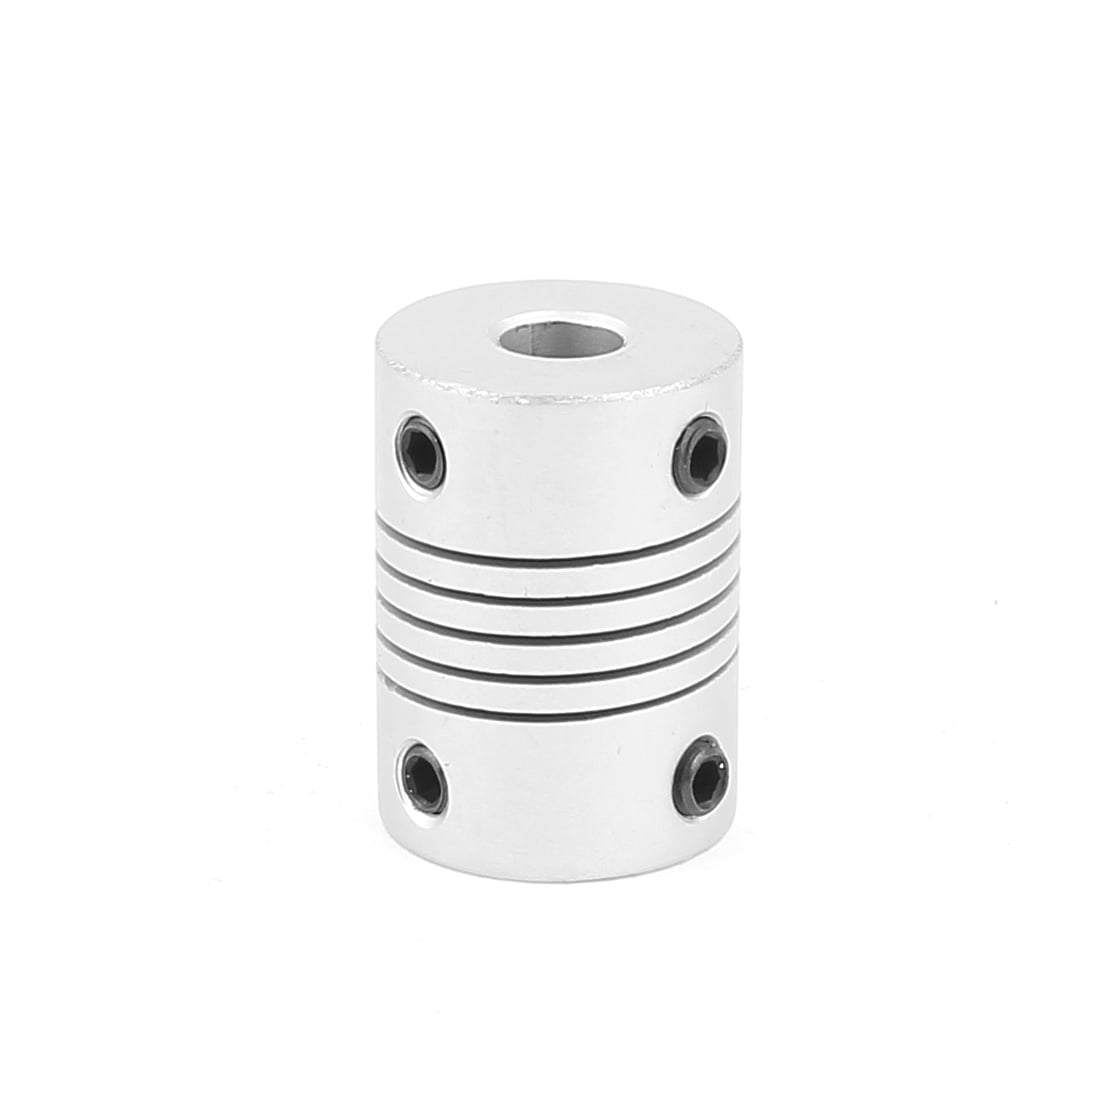 uxcell 6mm to 6mm Aluminium Alloy Encode Beam Coupling Joint DIY Motor Shaft Adapter a15113000ux1123 